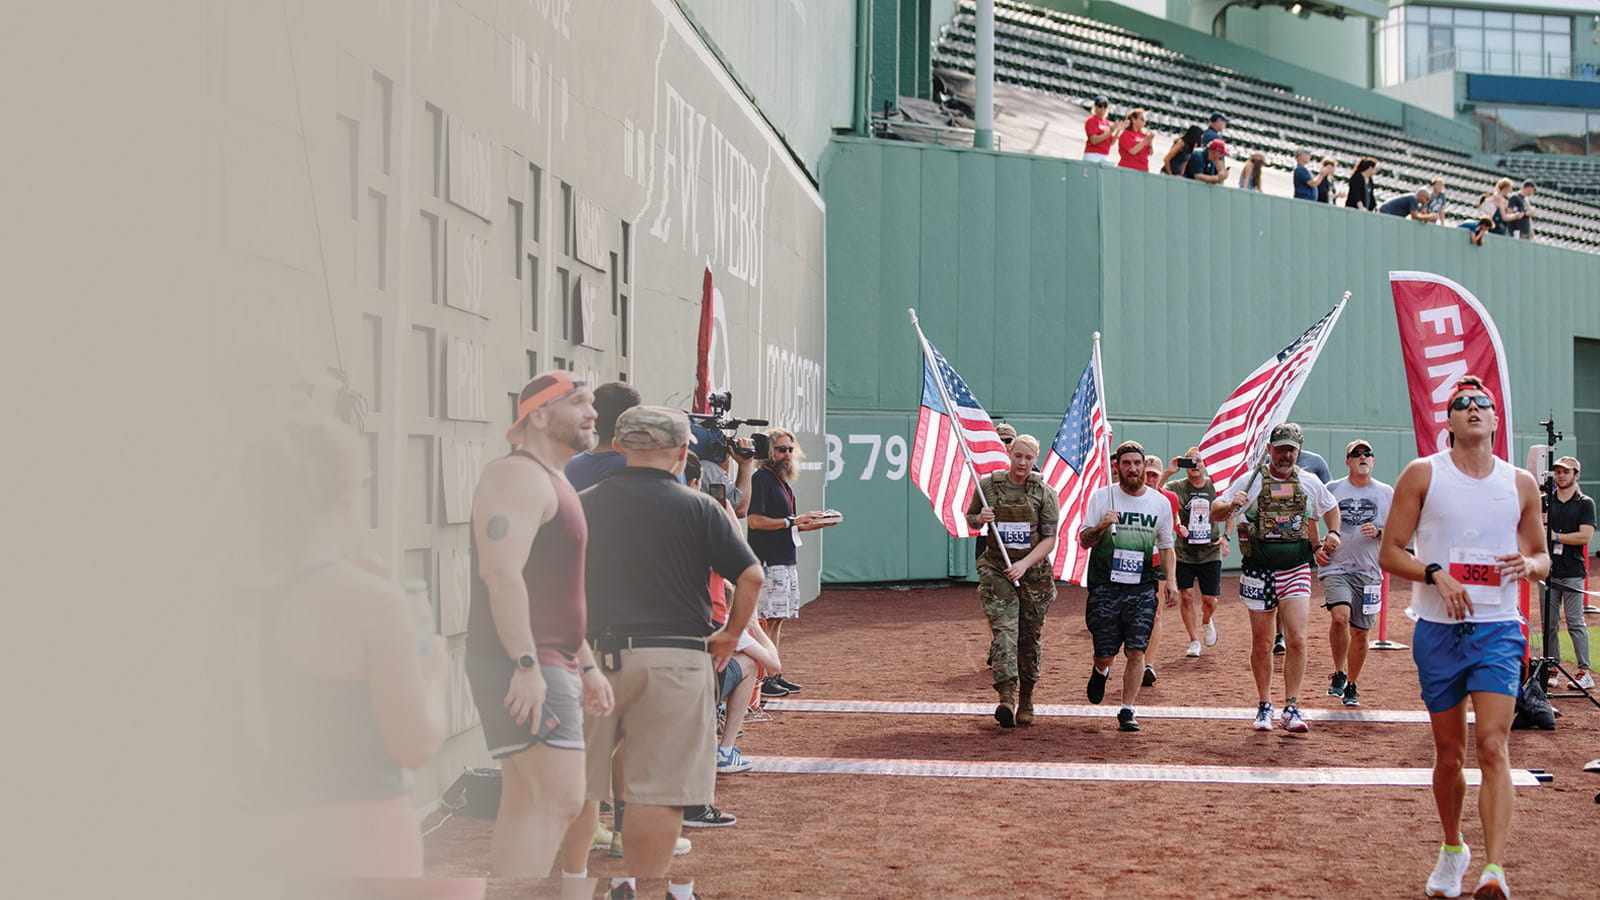 Three runners carry American flags during the Run to Home Base 9K event at Fenway Park in Boston.